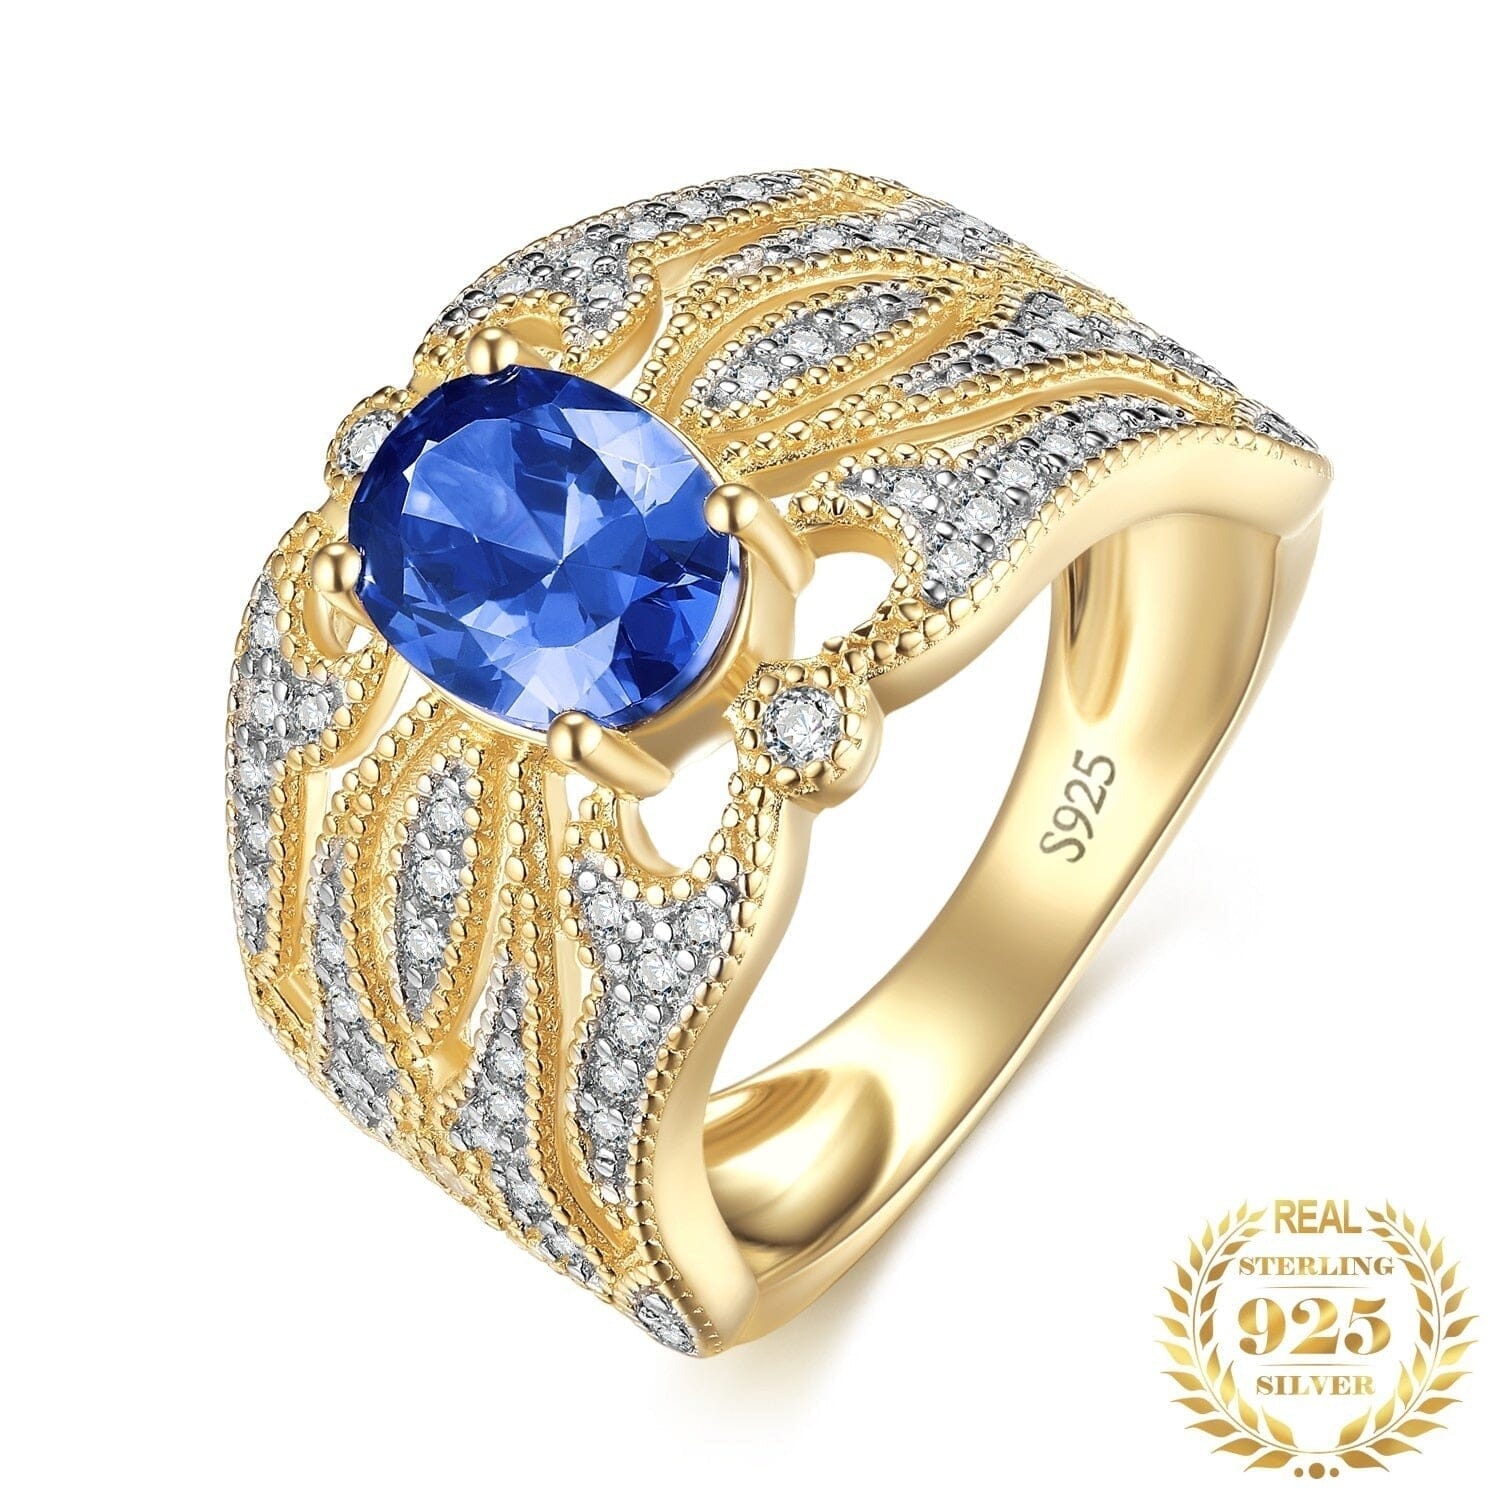 Luxury Engagement Sapphire Gold Ring - 925 Sterling SilverRing5